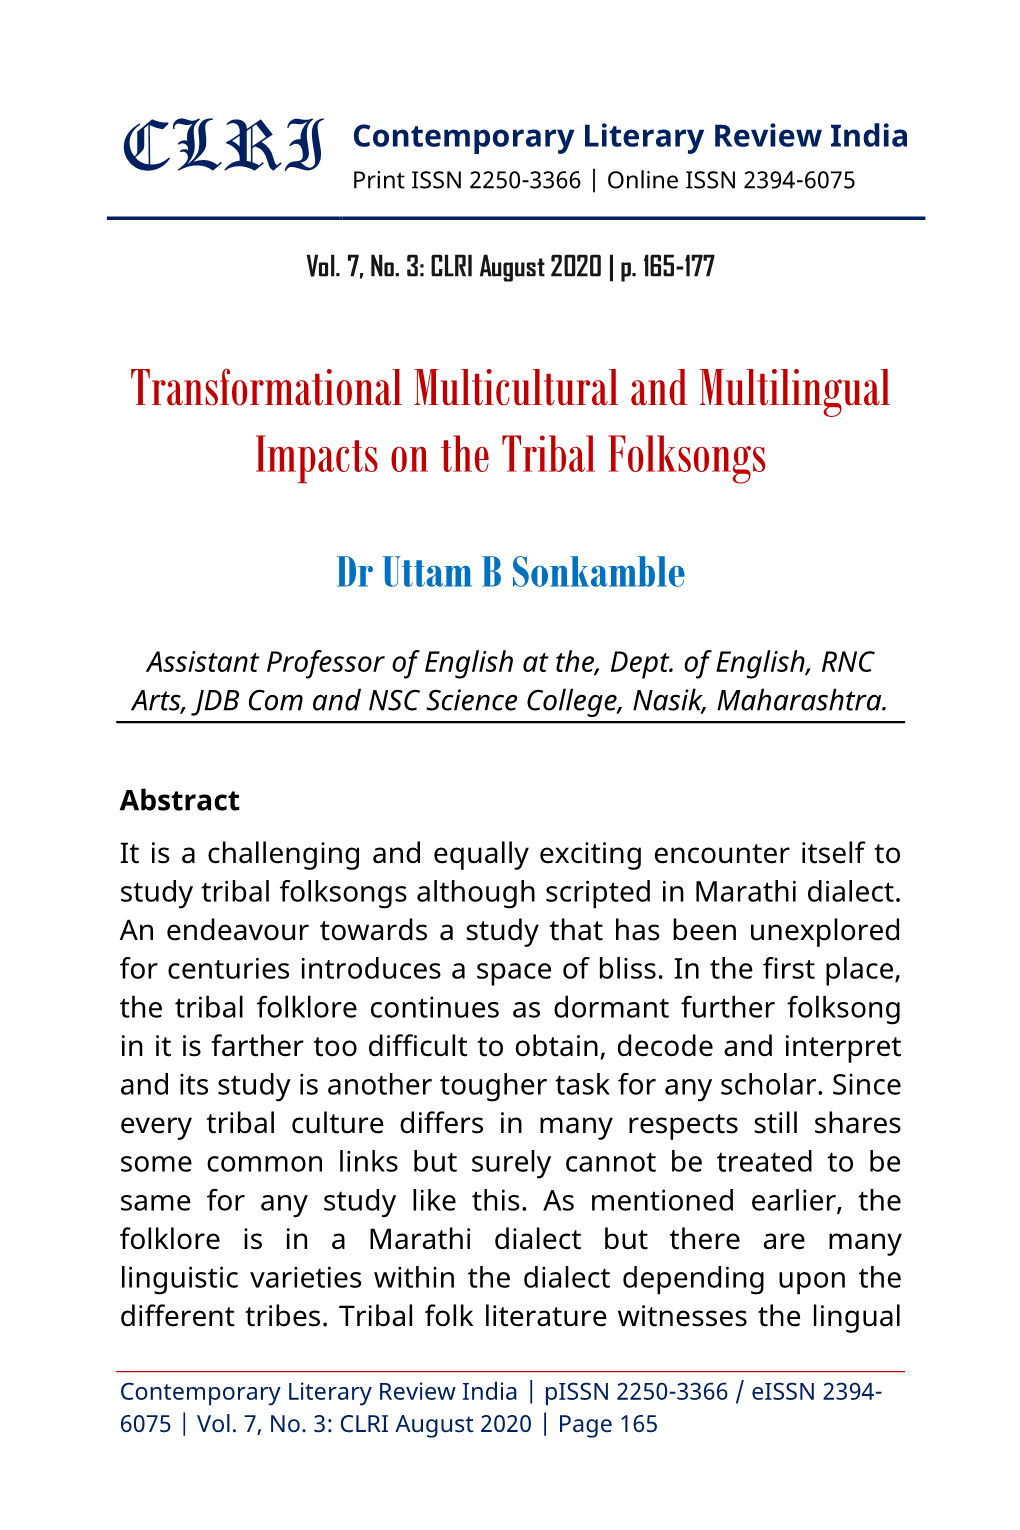 Transformational Multicultural and Multilingual Impacts on the Tribal Folksongs